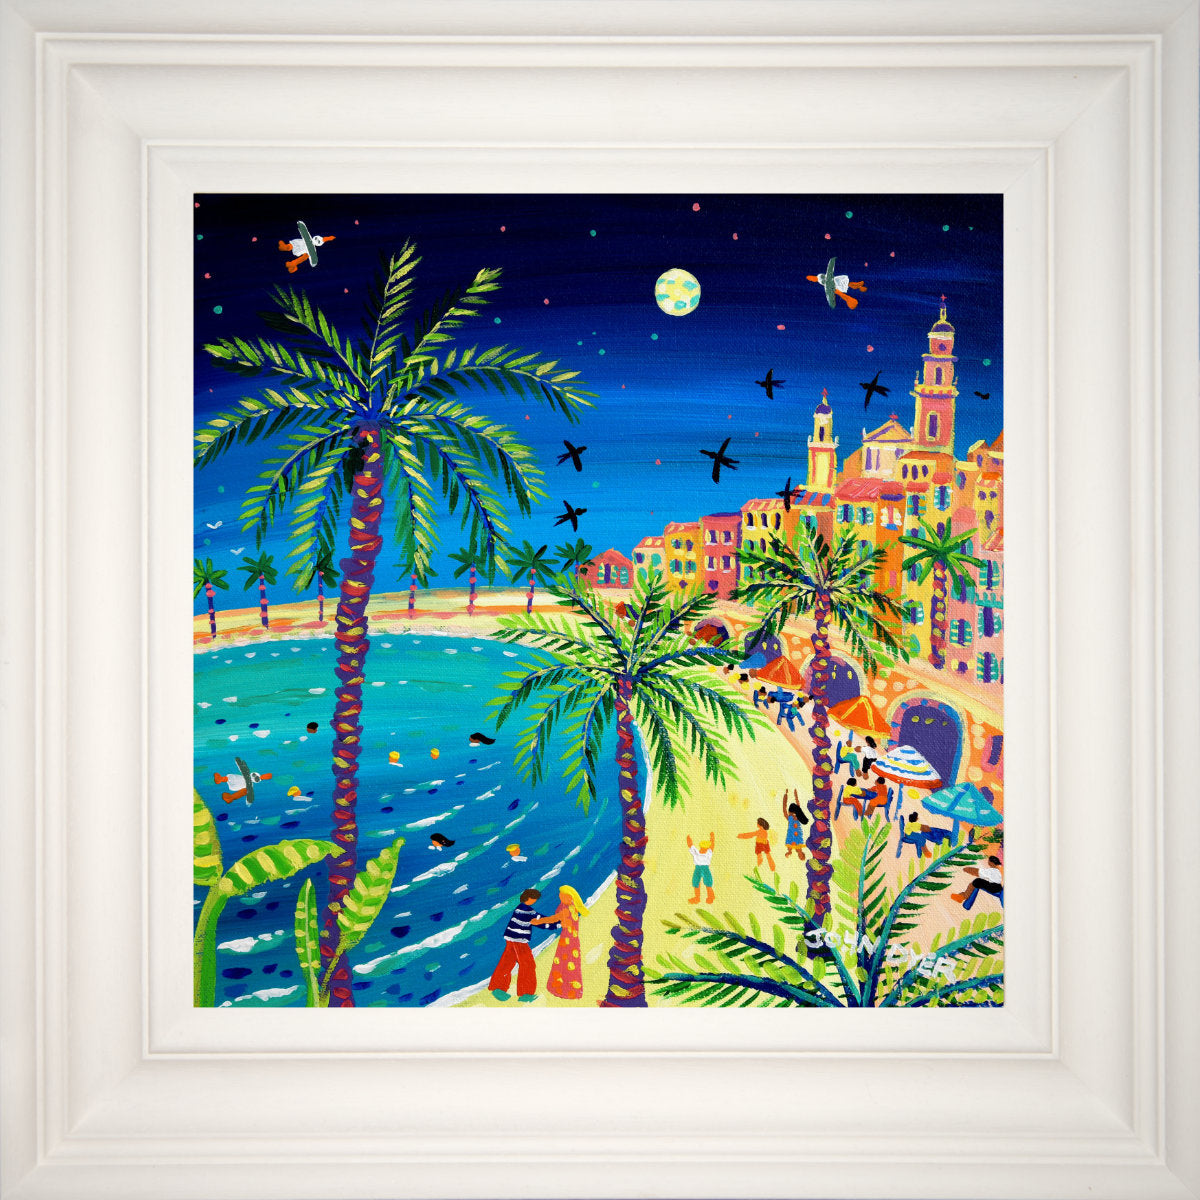 &#39;Love under the Moon, Menton, France&#39;, 12x12 inches acrylic on canvas. Paintings of France by British Artist John Dyer. French Art Gallery